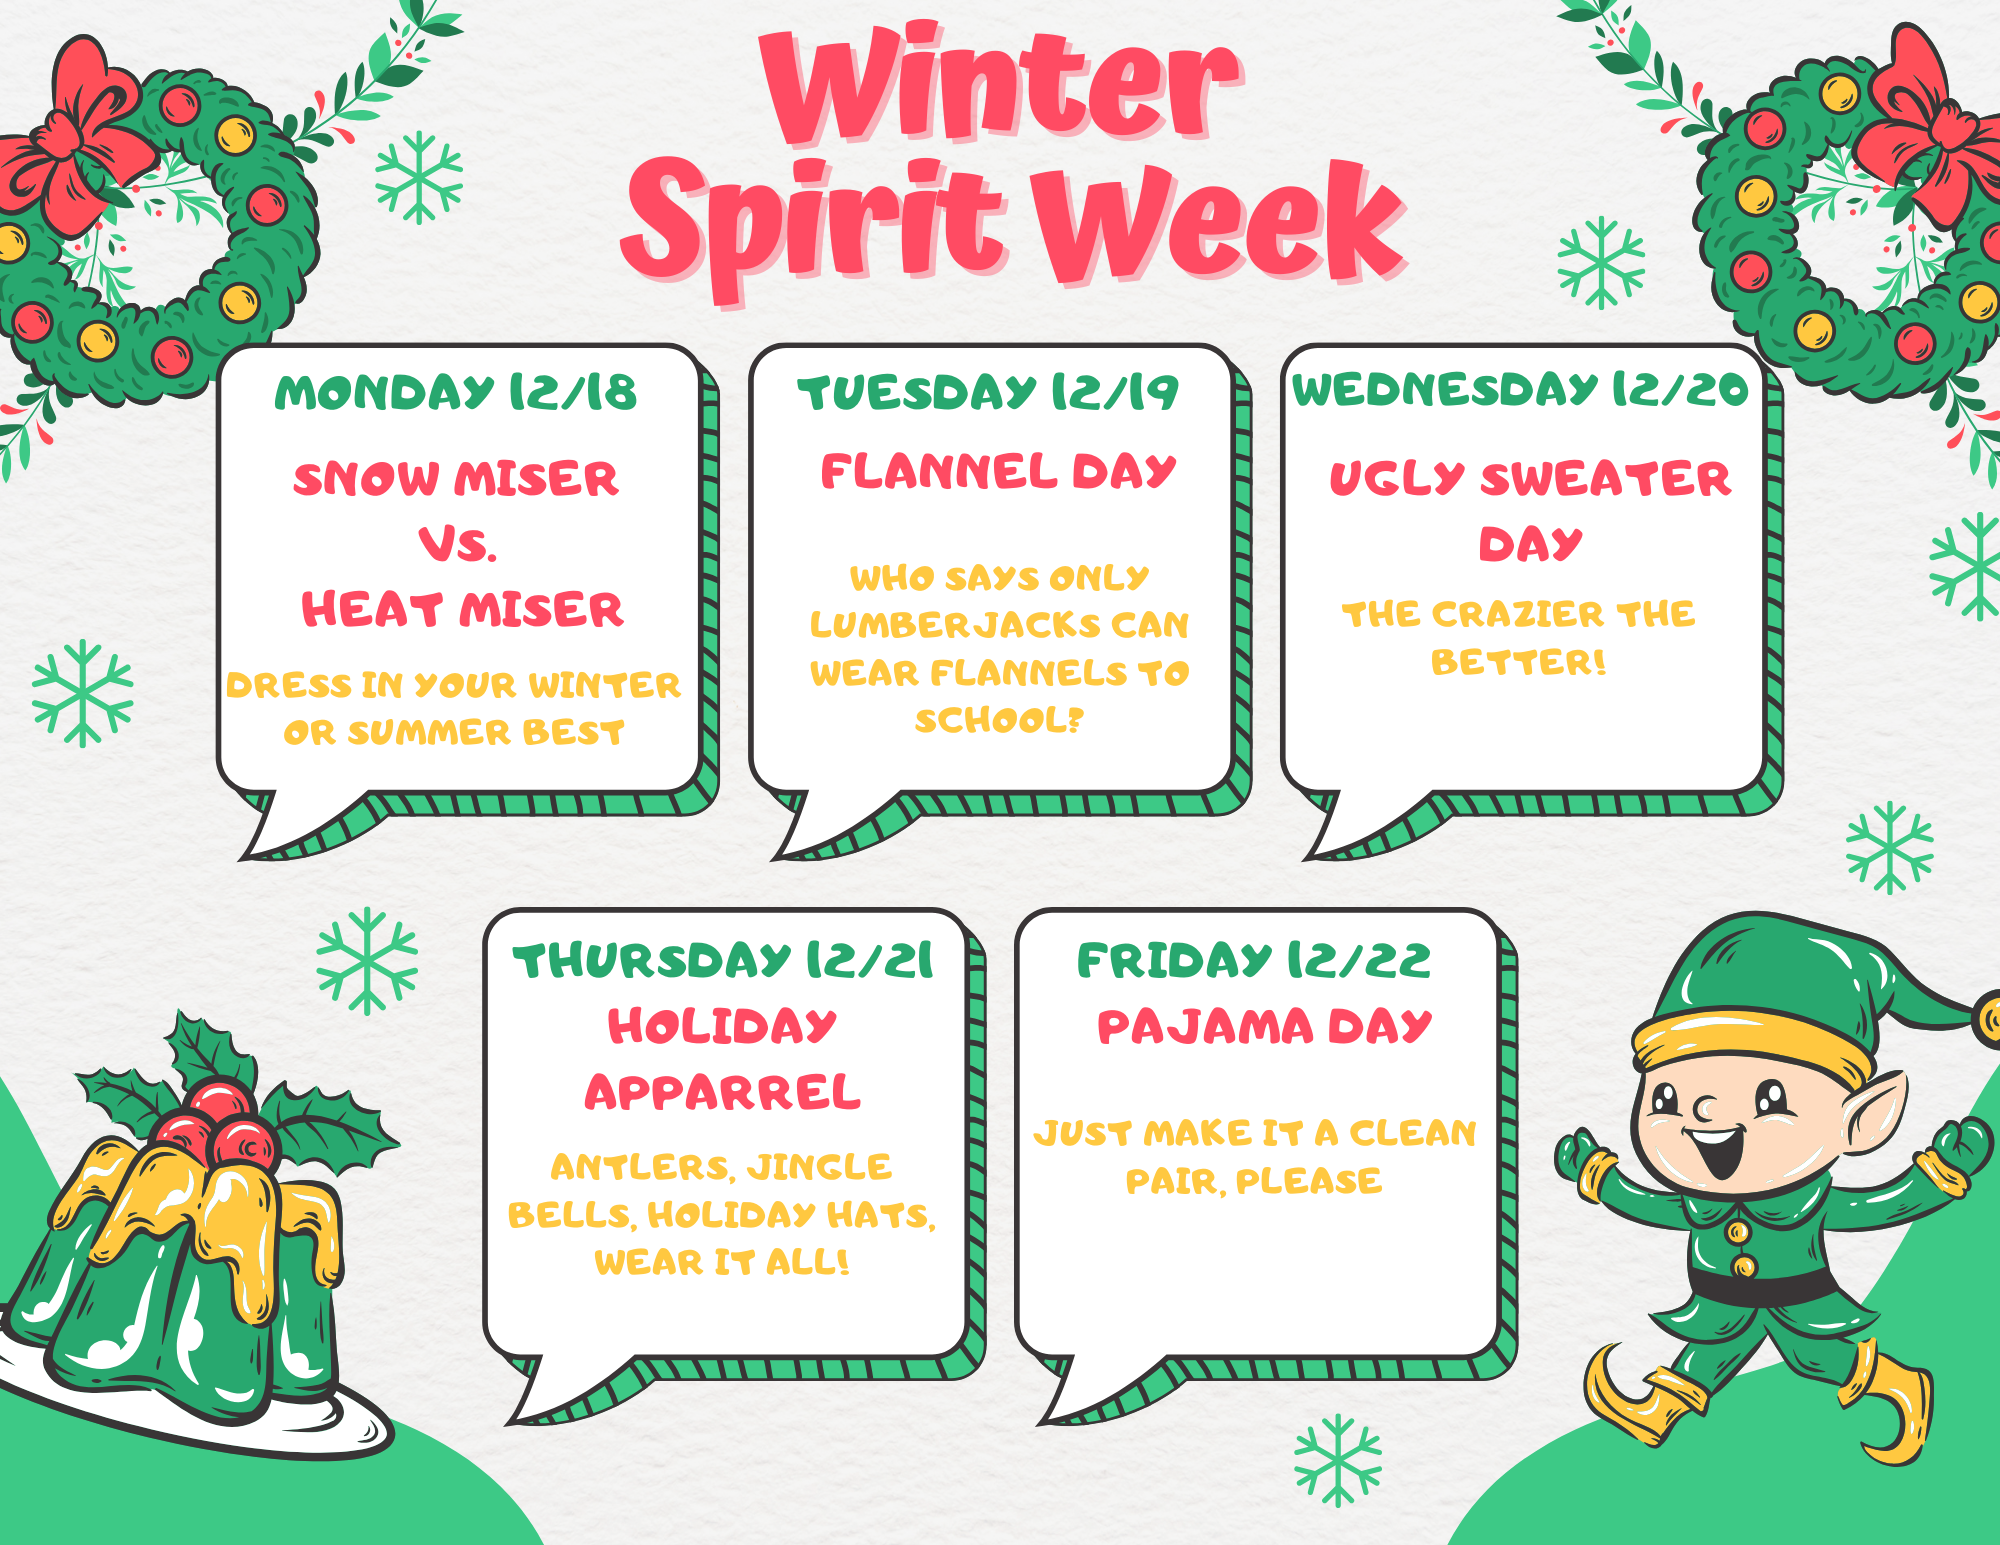 Spirit Week Flyer outlining dates and what to wear